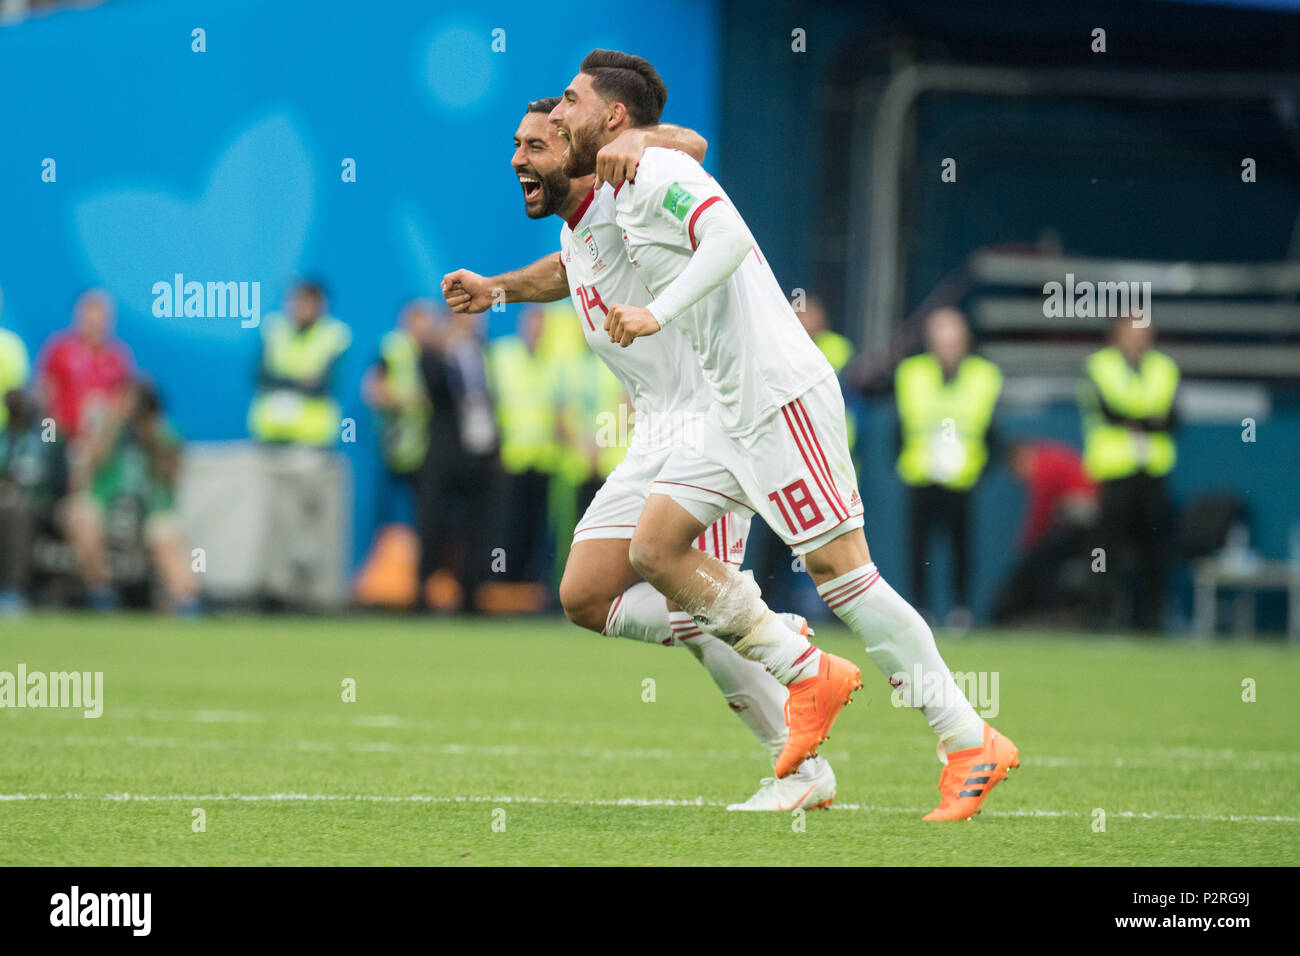 Alireza JAHANBAKHSH (right, IRN) and Saman GHODDOS (IRN) cheer after the end of the game, jubilation, cheering, cheering, joy, cheers, celebrate, final jubilation, full figure, Morocco (MAR) - Iran (IRN) 0: 1, Preliminary Round, Group B, Game 4, on 15.06.2018 in St.Petersburg; Football World Cup 2018 in Russia from 14.06. - 15.07.2018. | usage worldwide Stock Photo